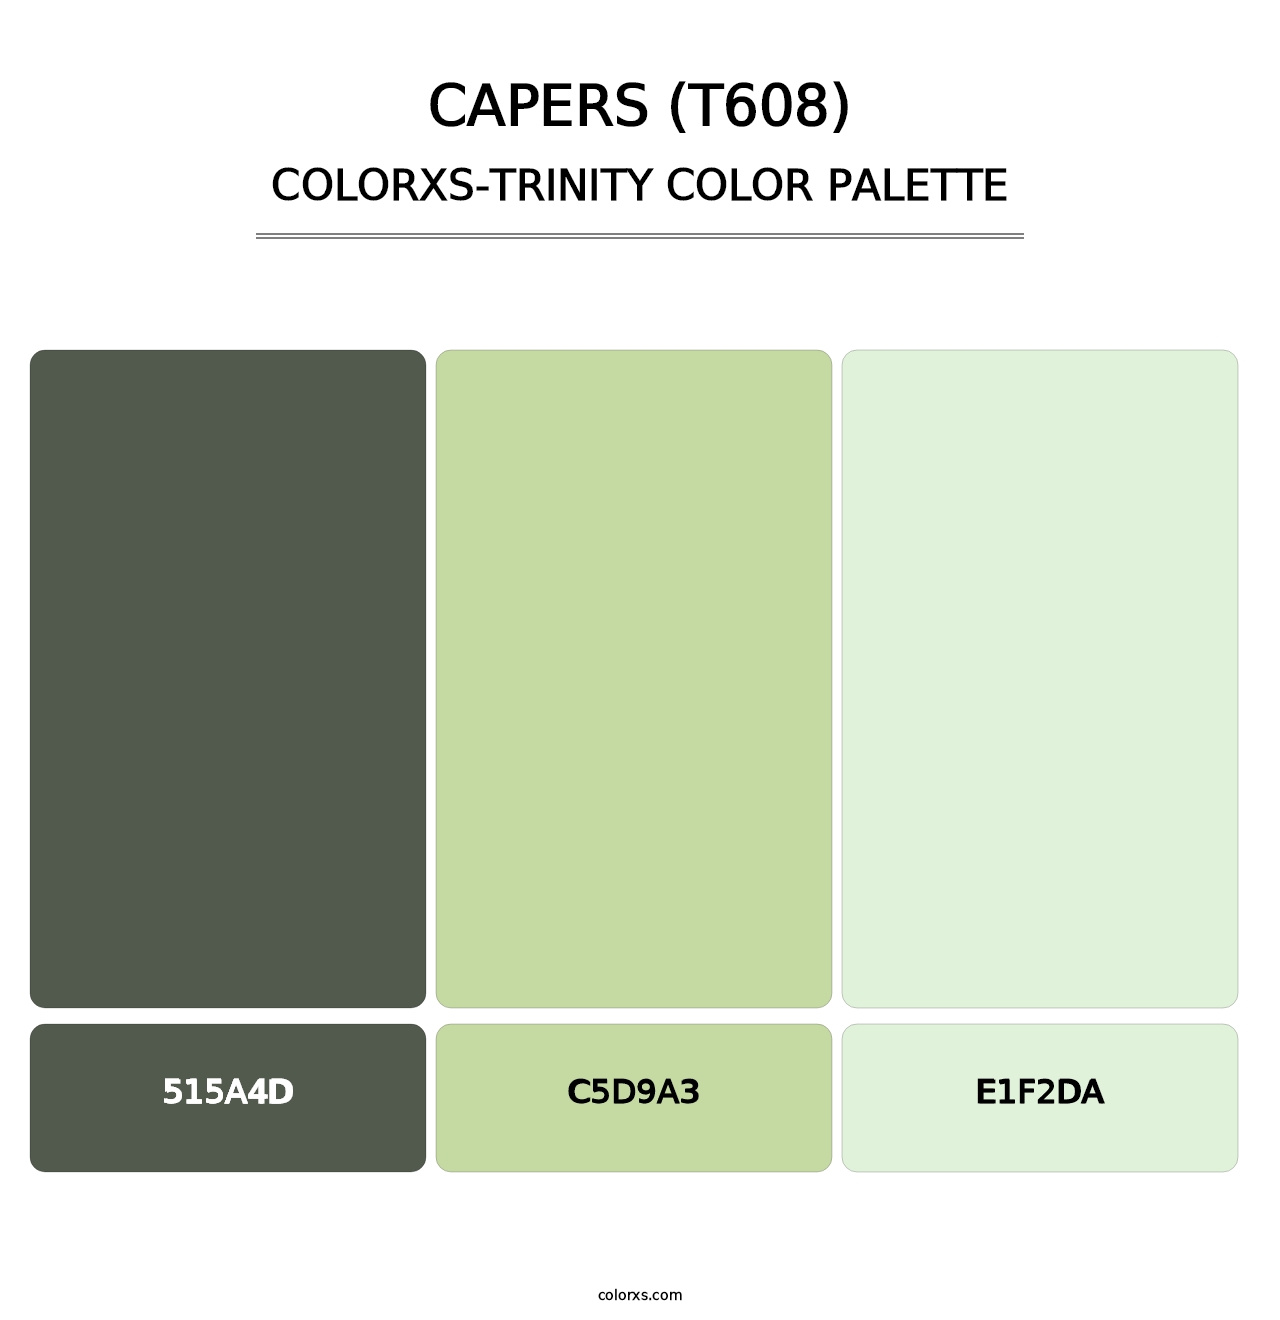 Capers (T608) - Colorxs Trinity Palette